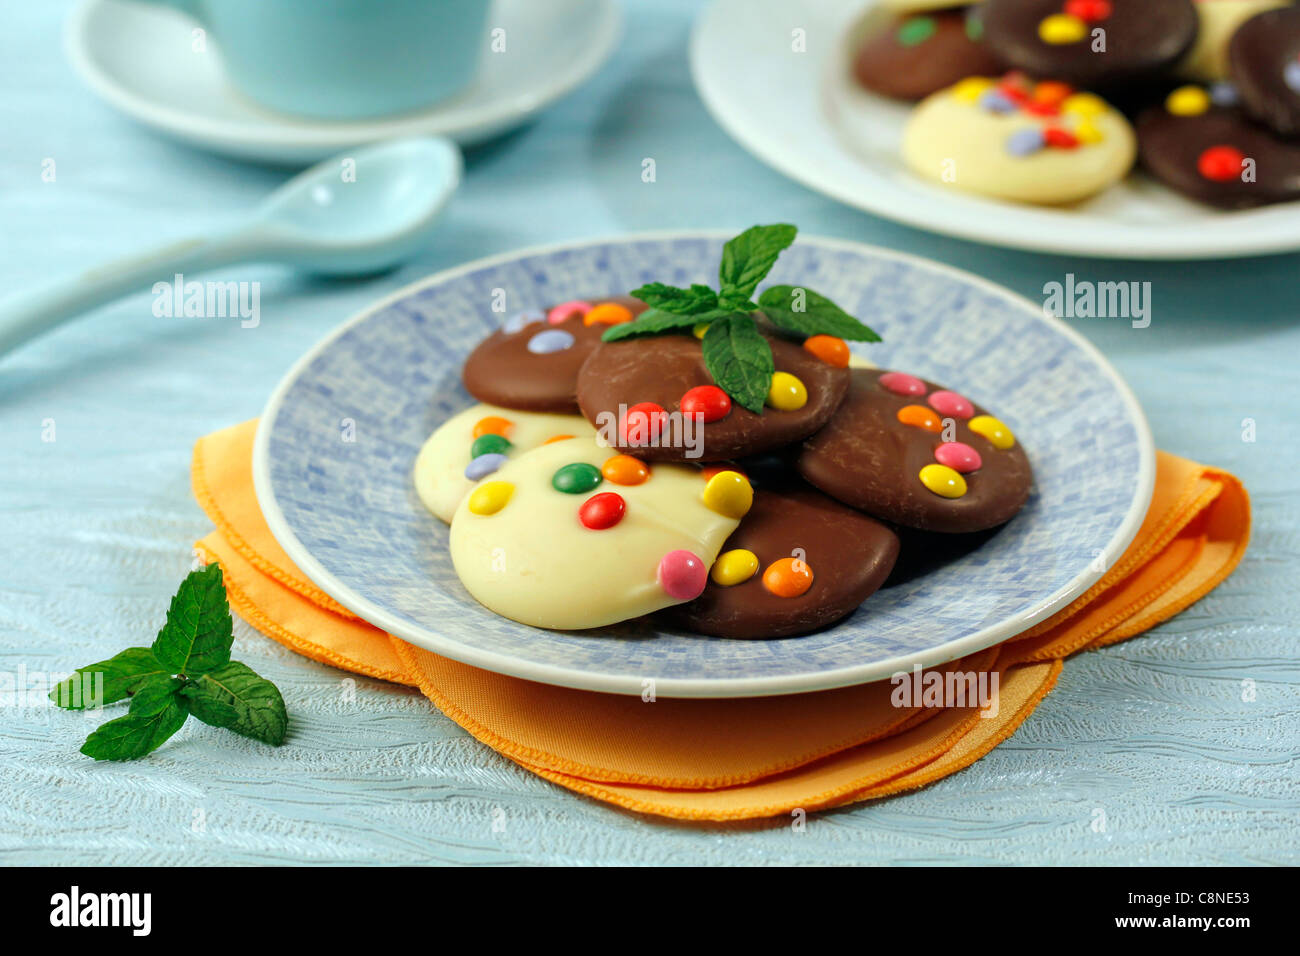 Two chocolates delights. Recipe available. Stock Photo